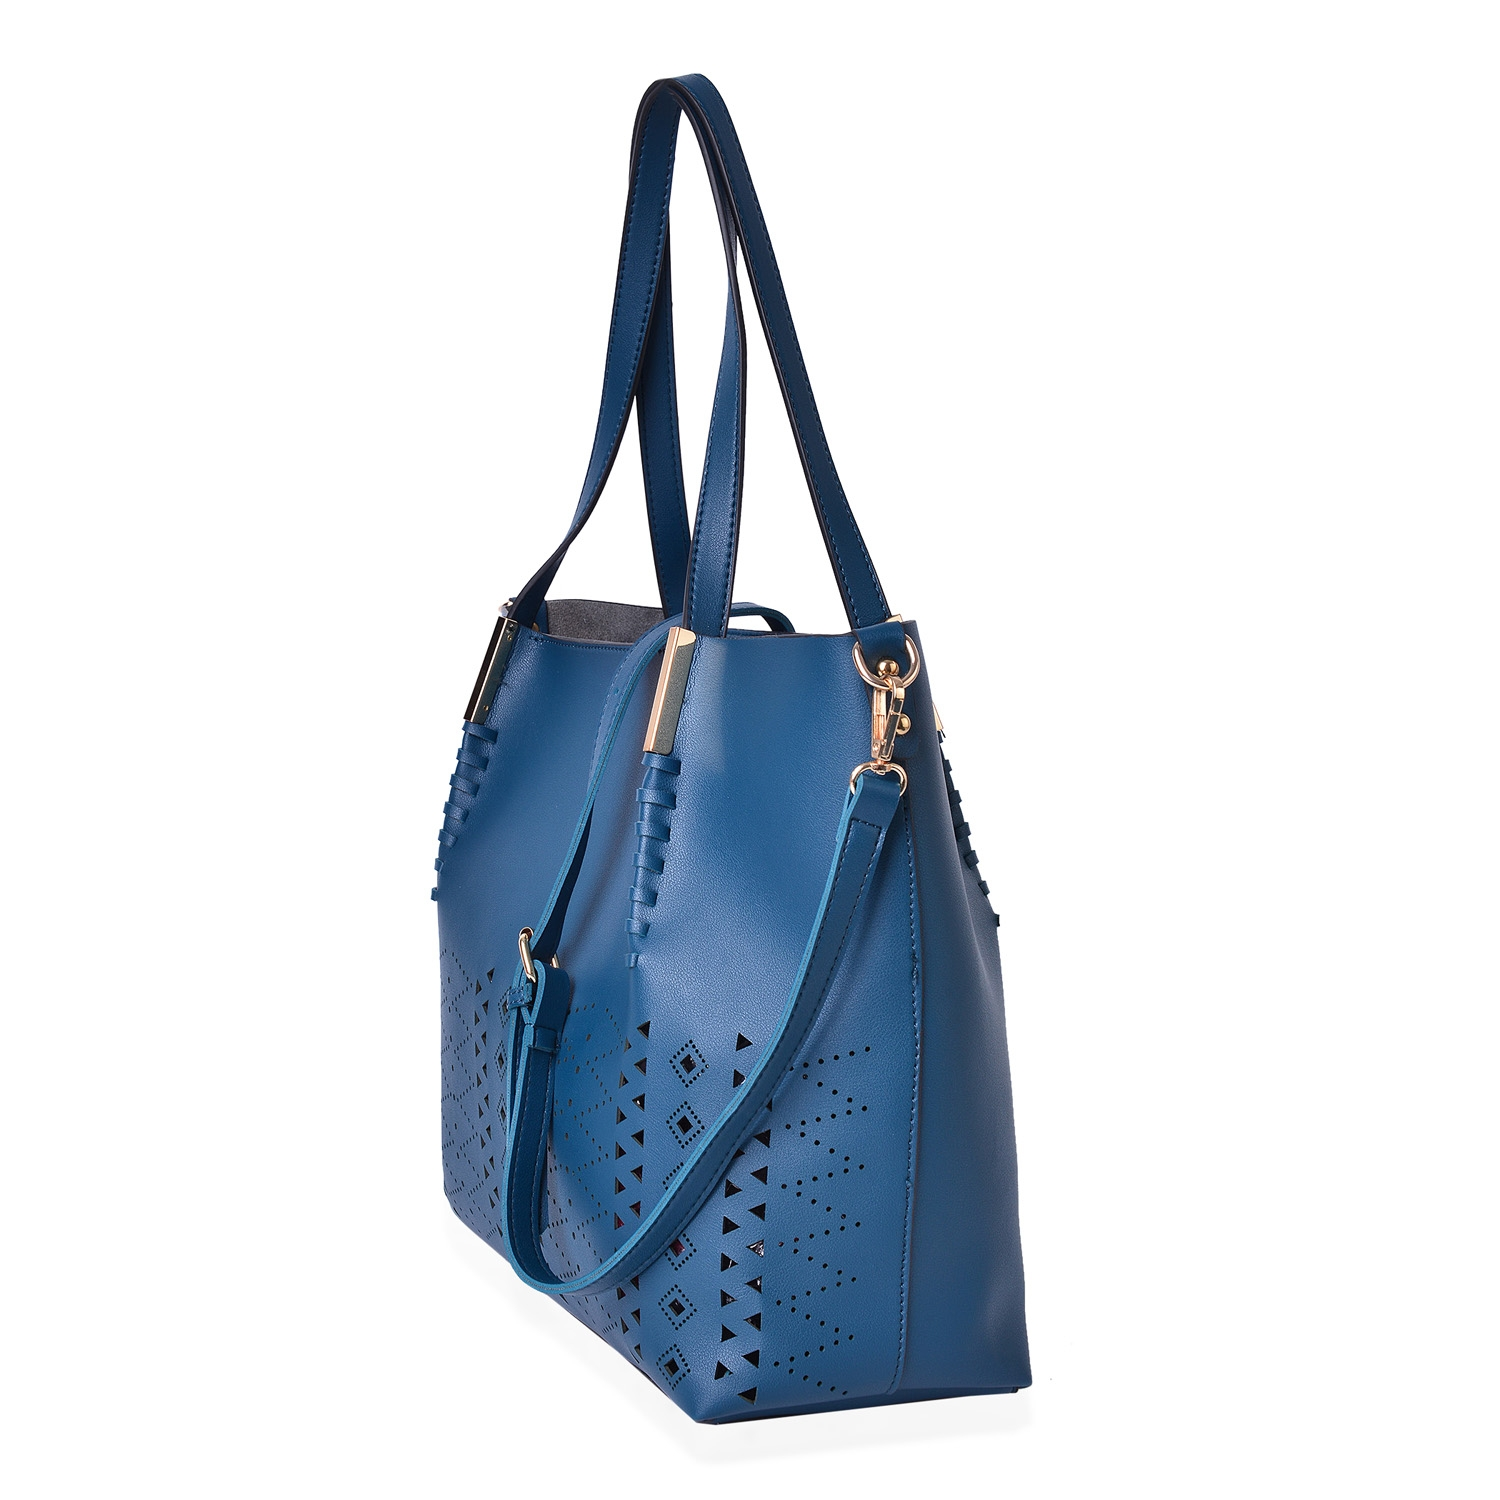 She is Razor Sharp Vegan Tote in Teal and Burgundy - Houzz of DVA Boutique